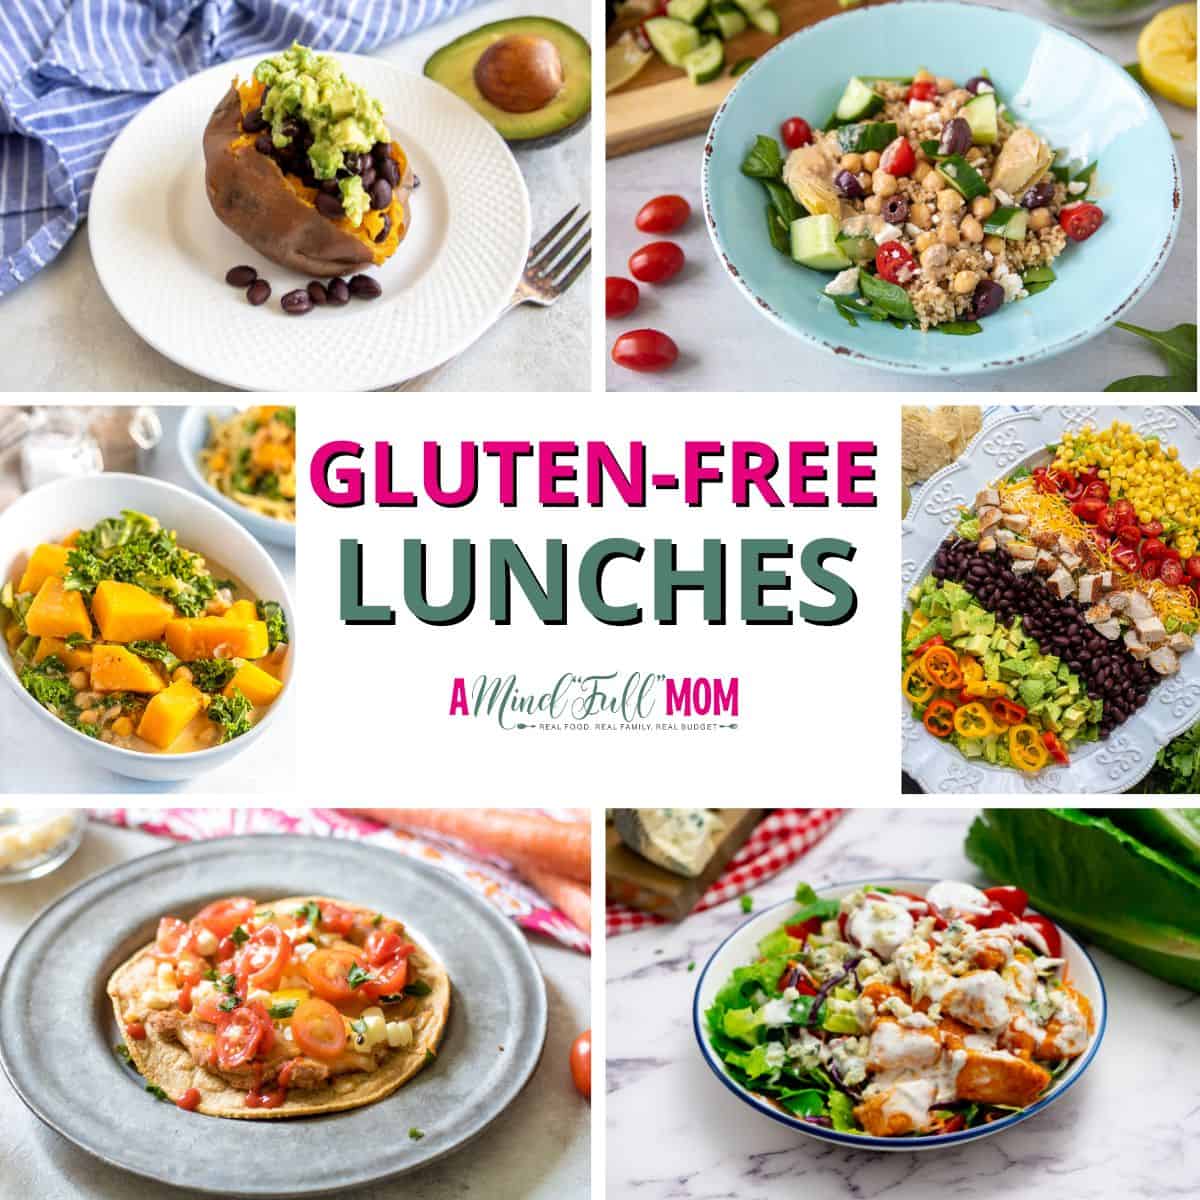 https://amindfullmom.com/wp-content/uploads/2022/08/Ideas-for-Gluten-Free-Lunches.jpg